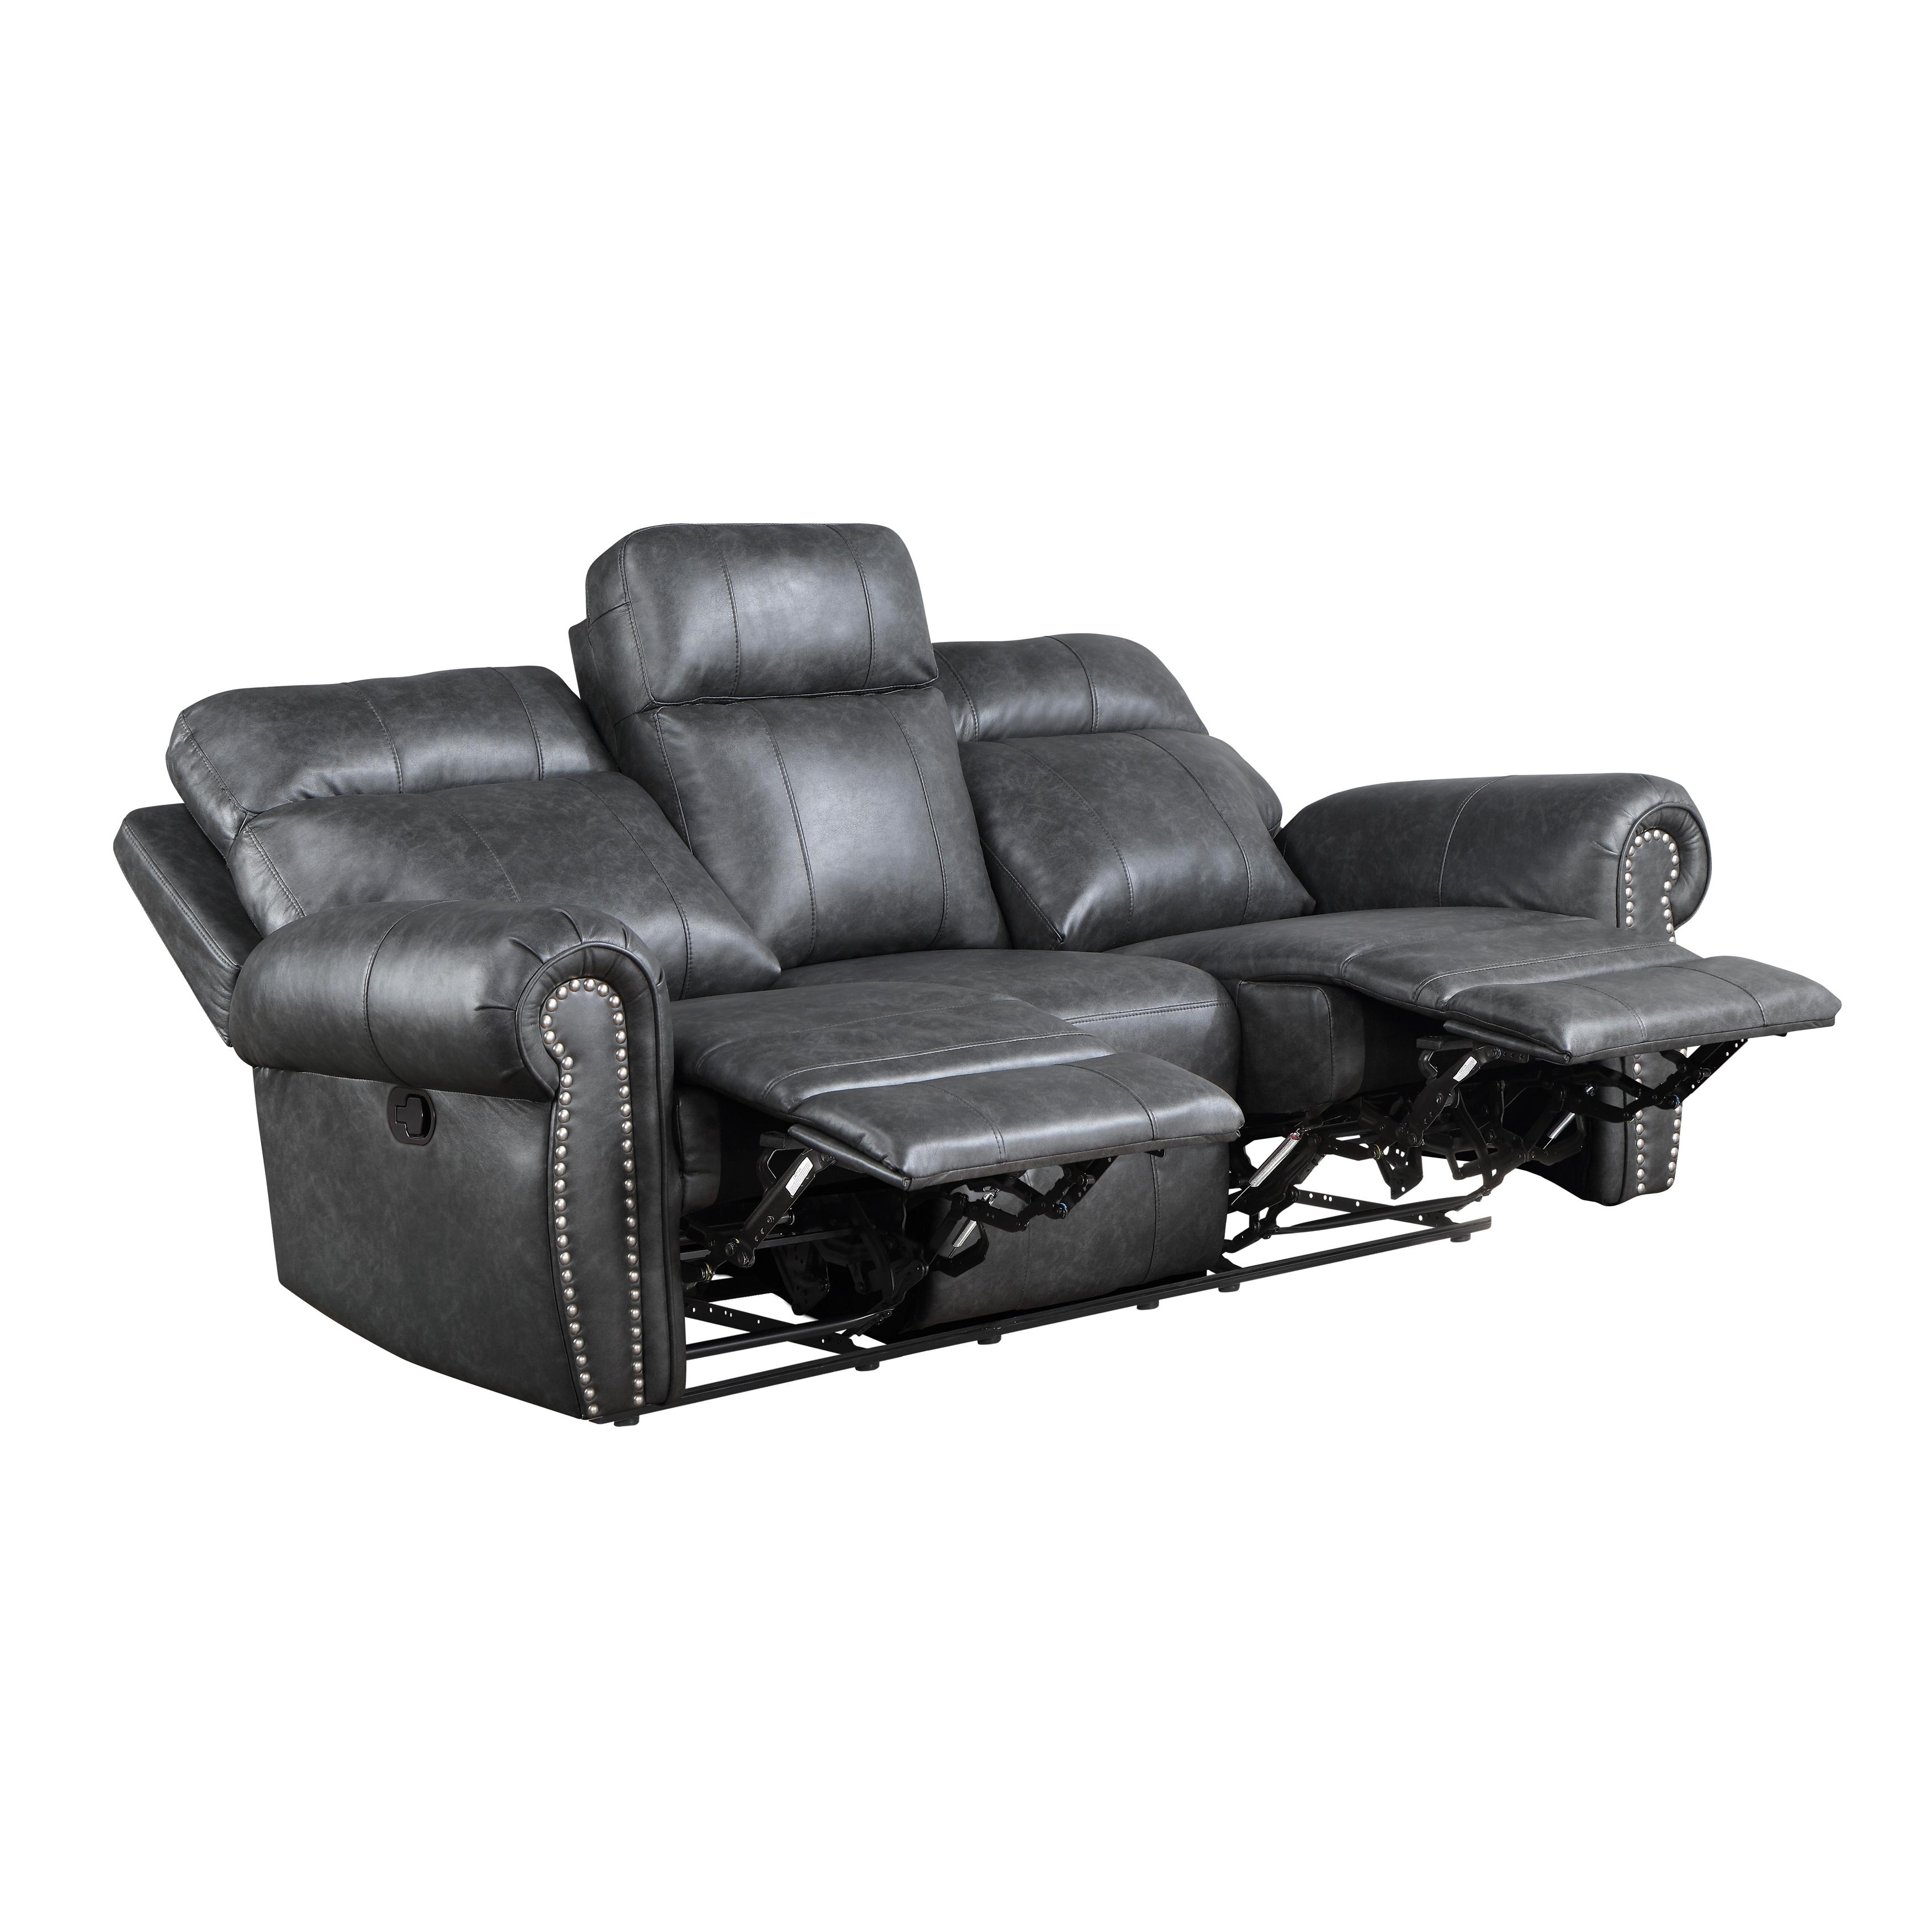 

    
Homelegance 9488GY-3 Granville Reclining Sofa Gray 9488GY-3
